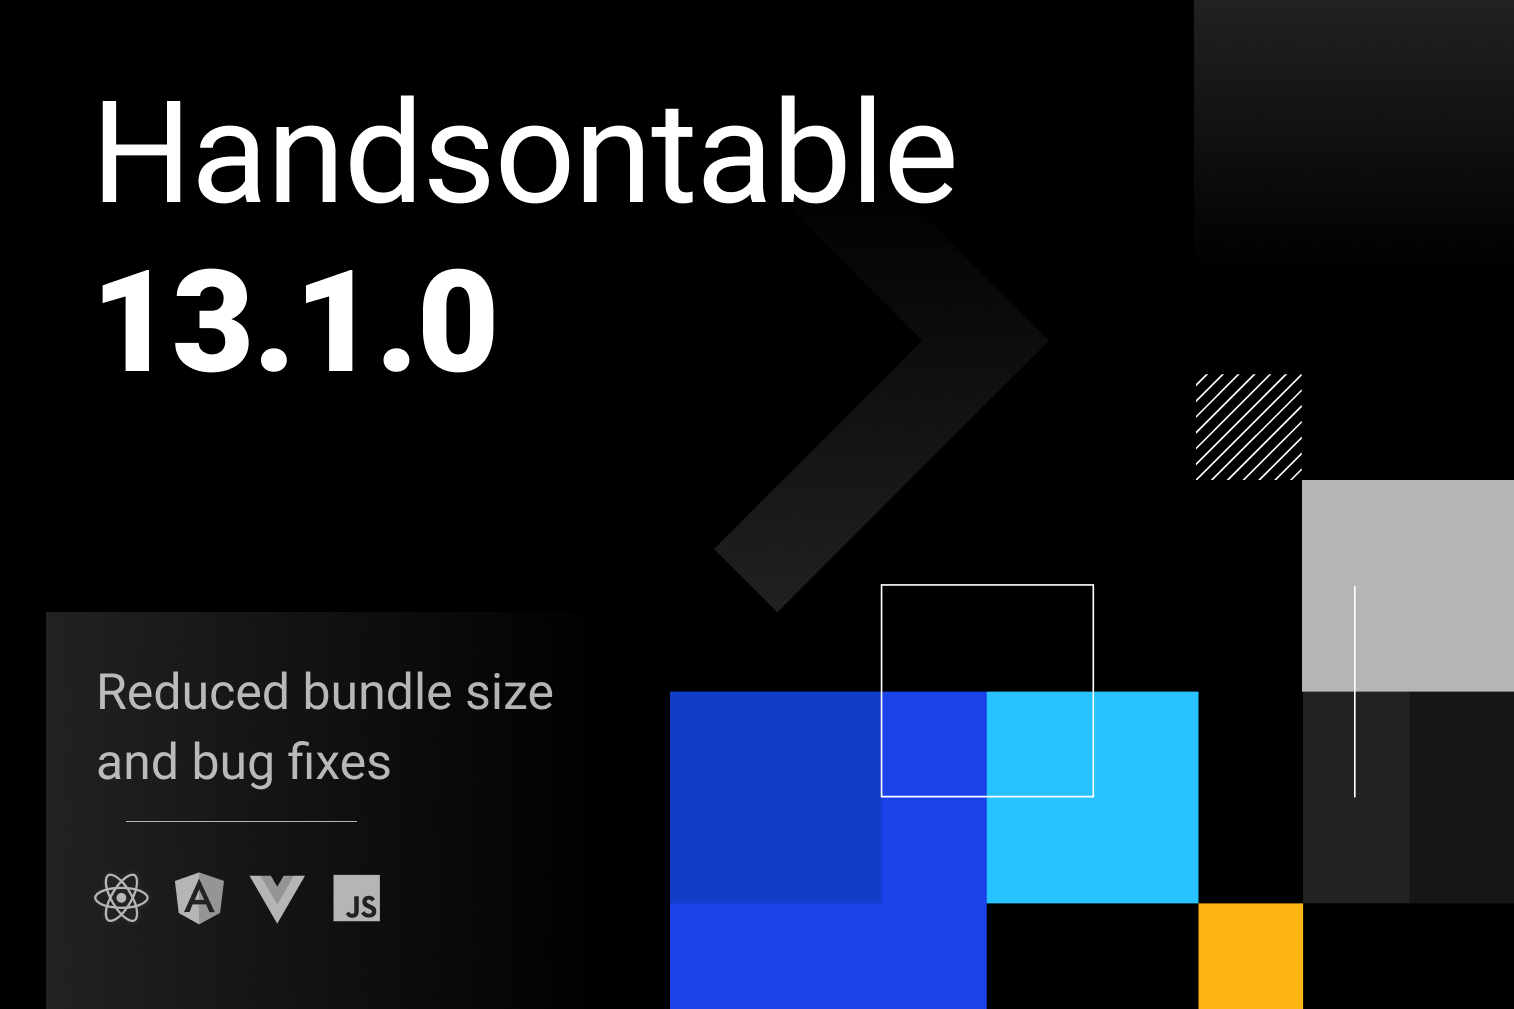 Handsontable 13.1.0: Reduced bundle size and bug fixes